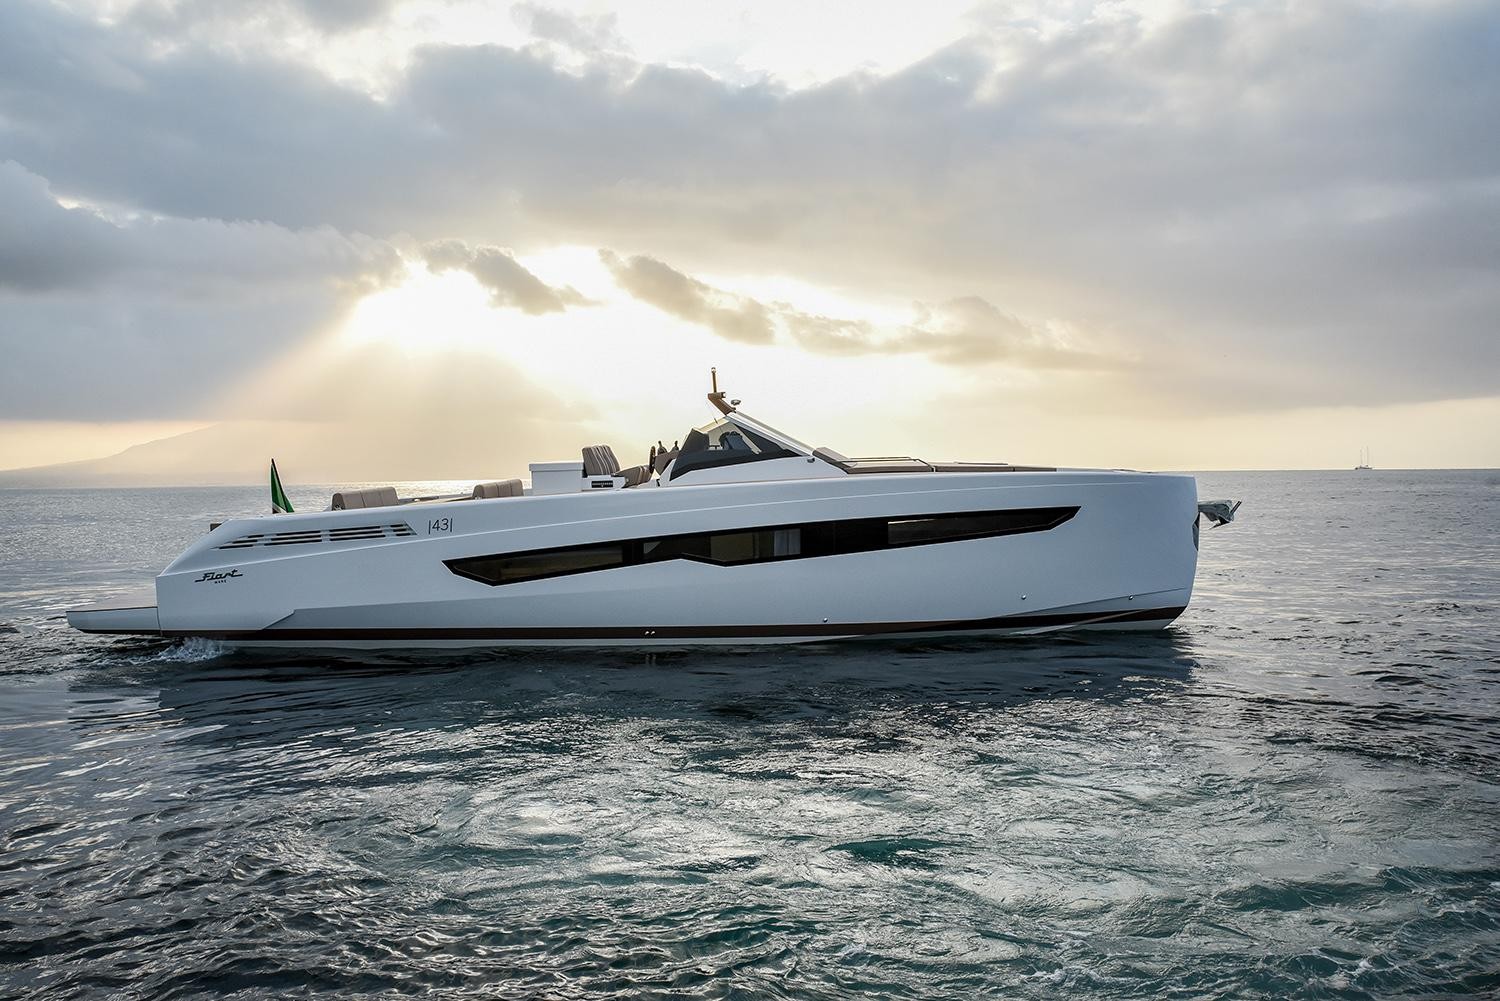 The Fiart 43 Seawalker launches